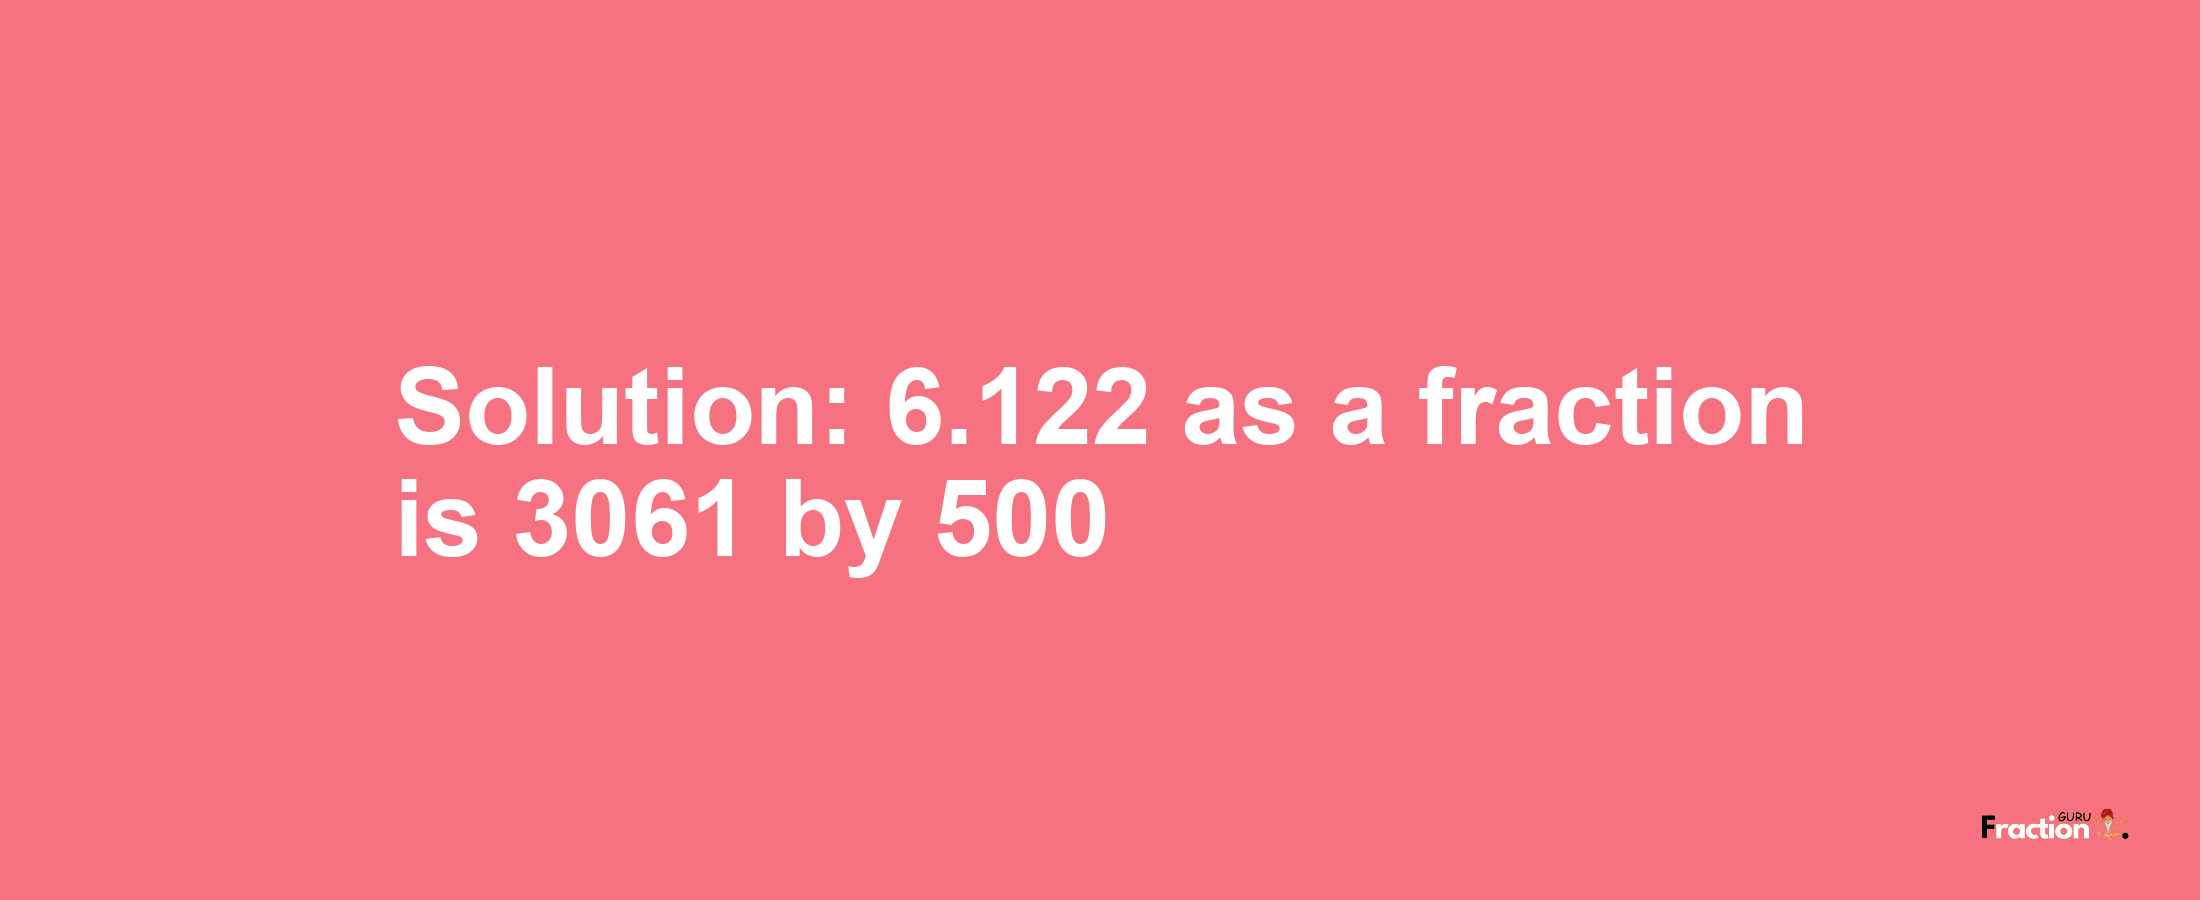 Solution:6.122 as a fraction is 3061/500